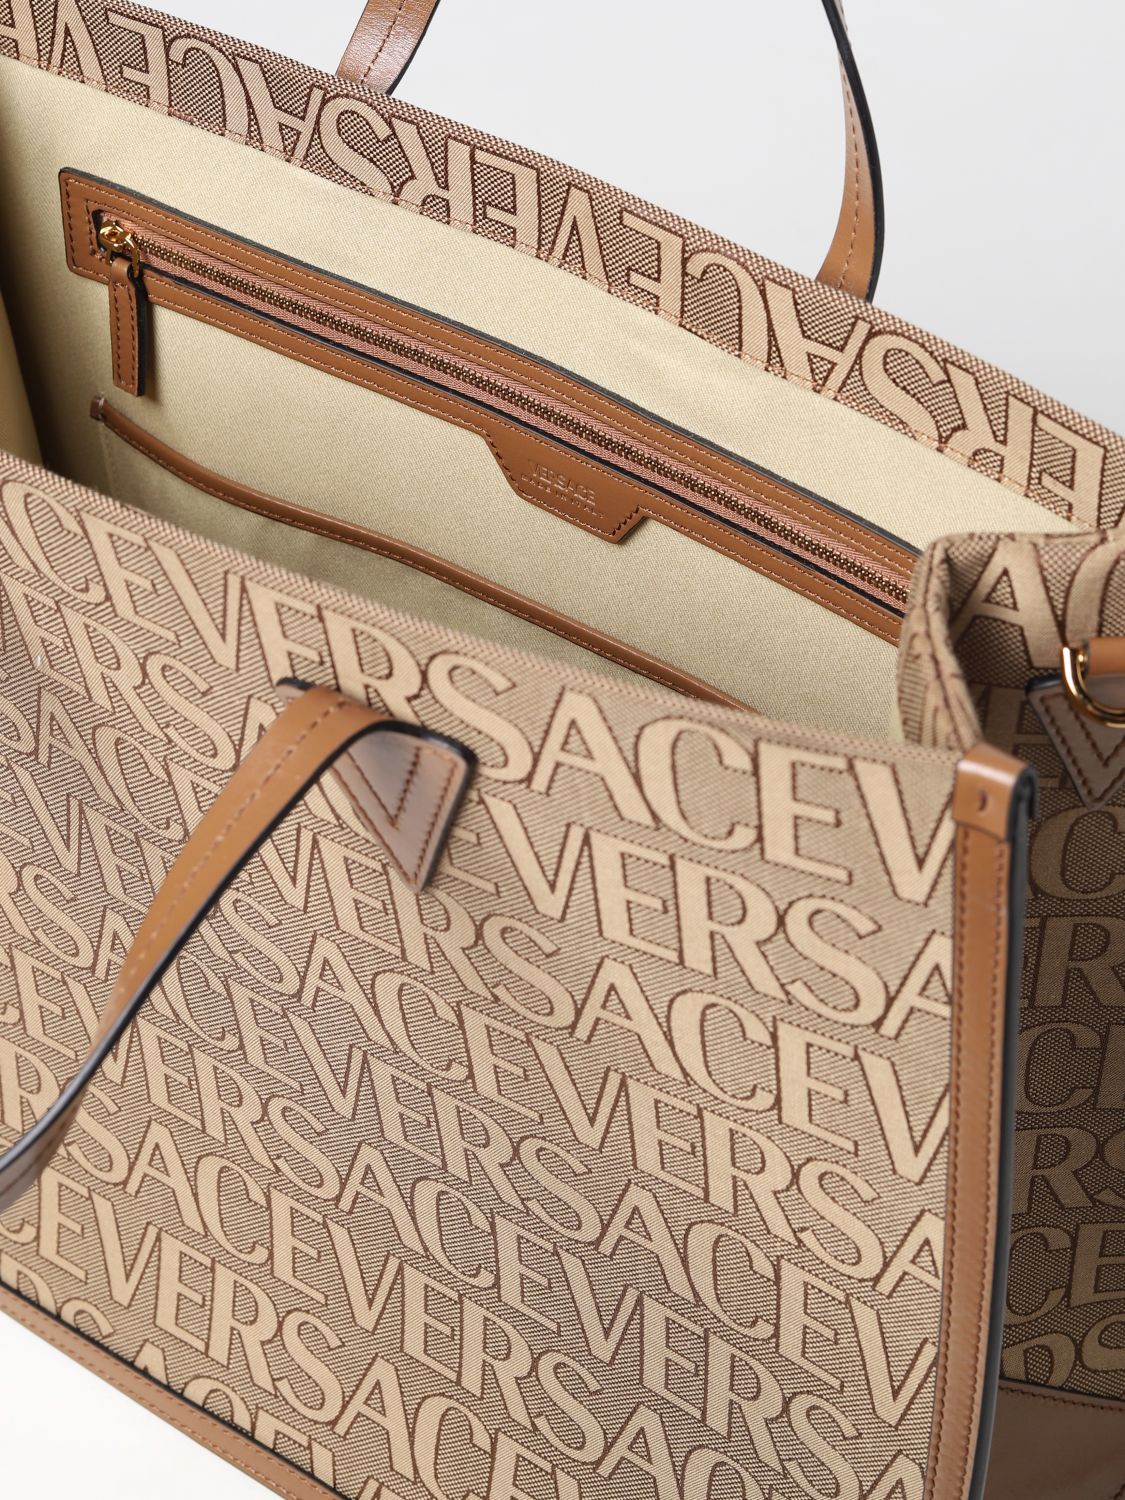 VERSACE: Allover ag in jacquard canvas - Brown  Versace tote bags  10047411A08199 online at